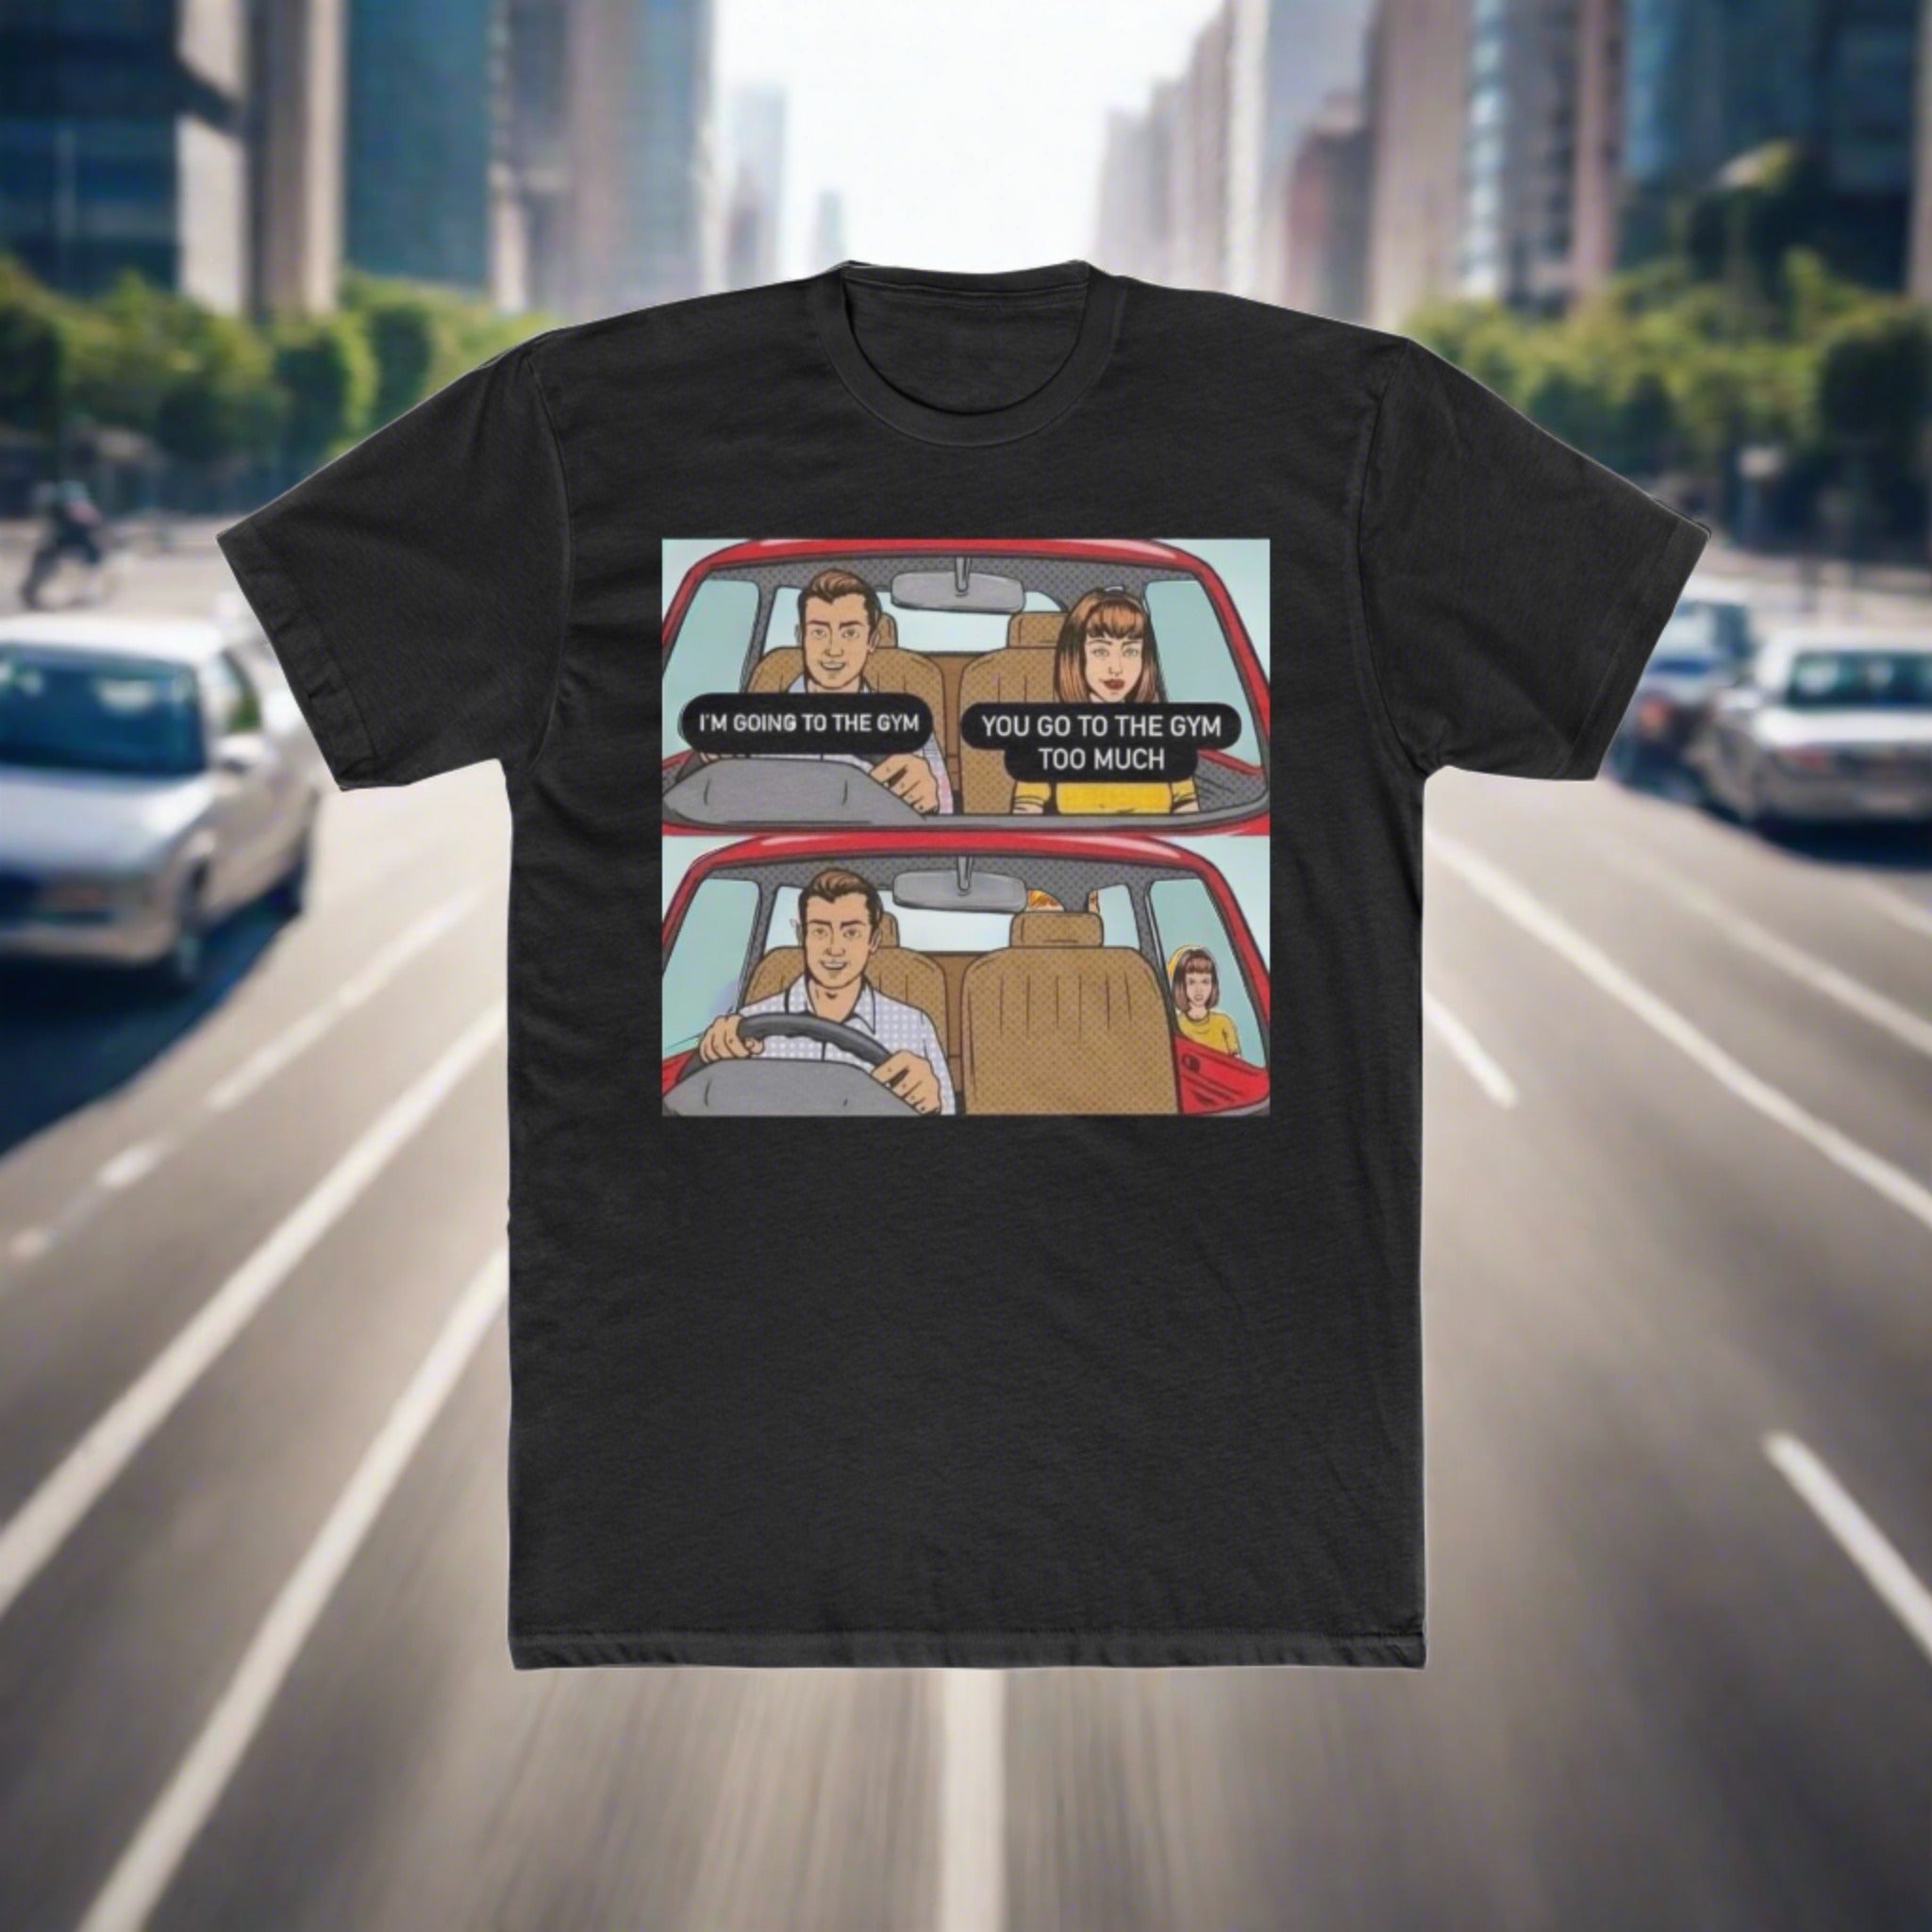 The image shows a stylish men's cotton crew tee adorned with a vibrant, comic-style illustration of a man humorously ejecting his girlfriend from the car on his way to the gym. The caption "Gym Over Romance" boldly underscores the image, making it clear where his priorities lie. The shirt's relaxed fit and soft material are evident, promising both comfort and style.